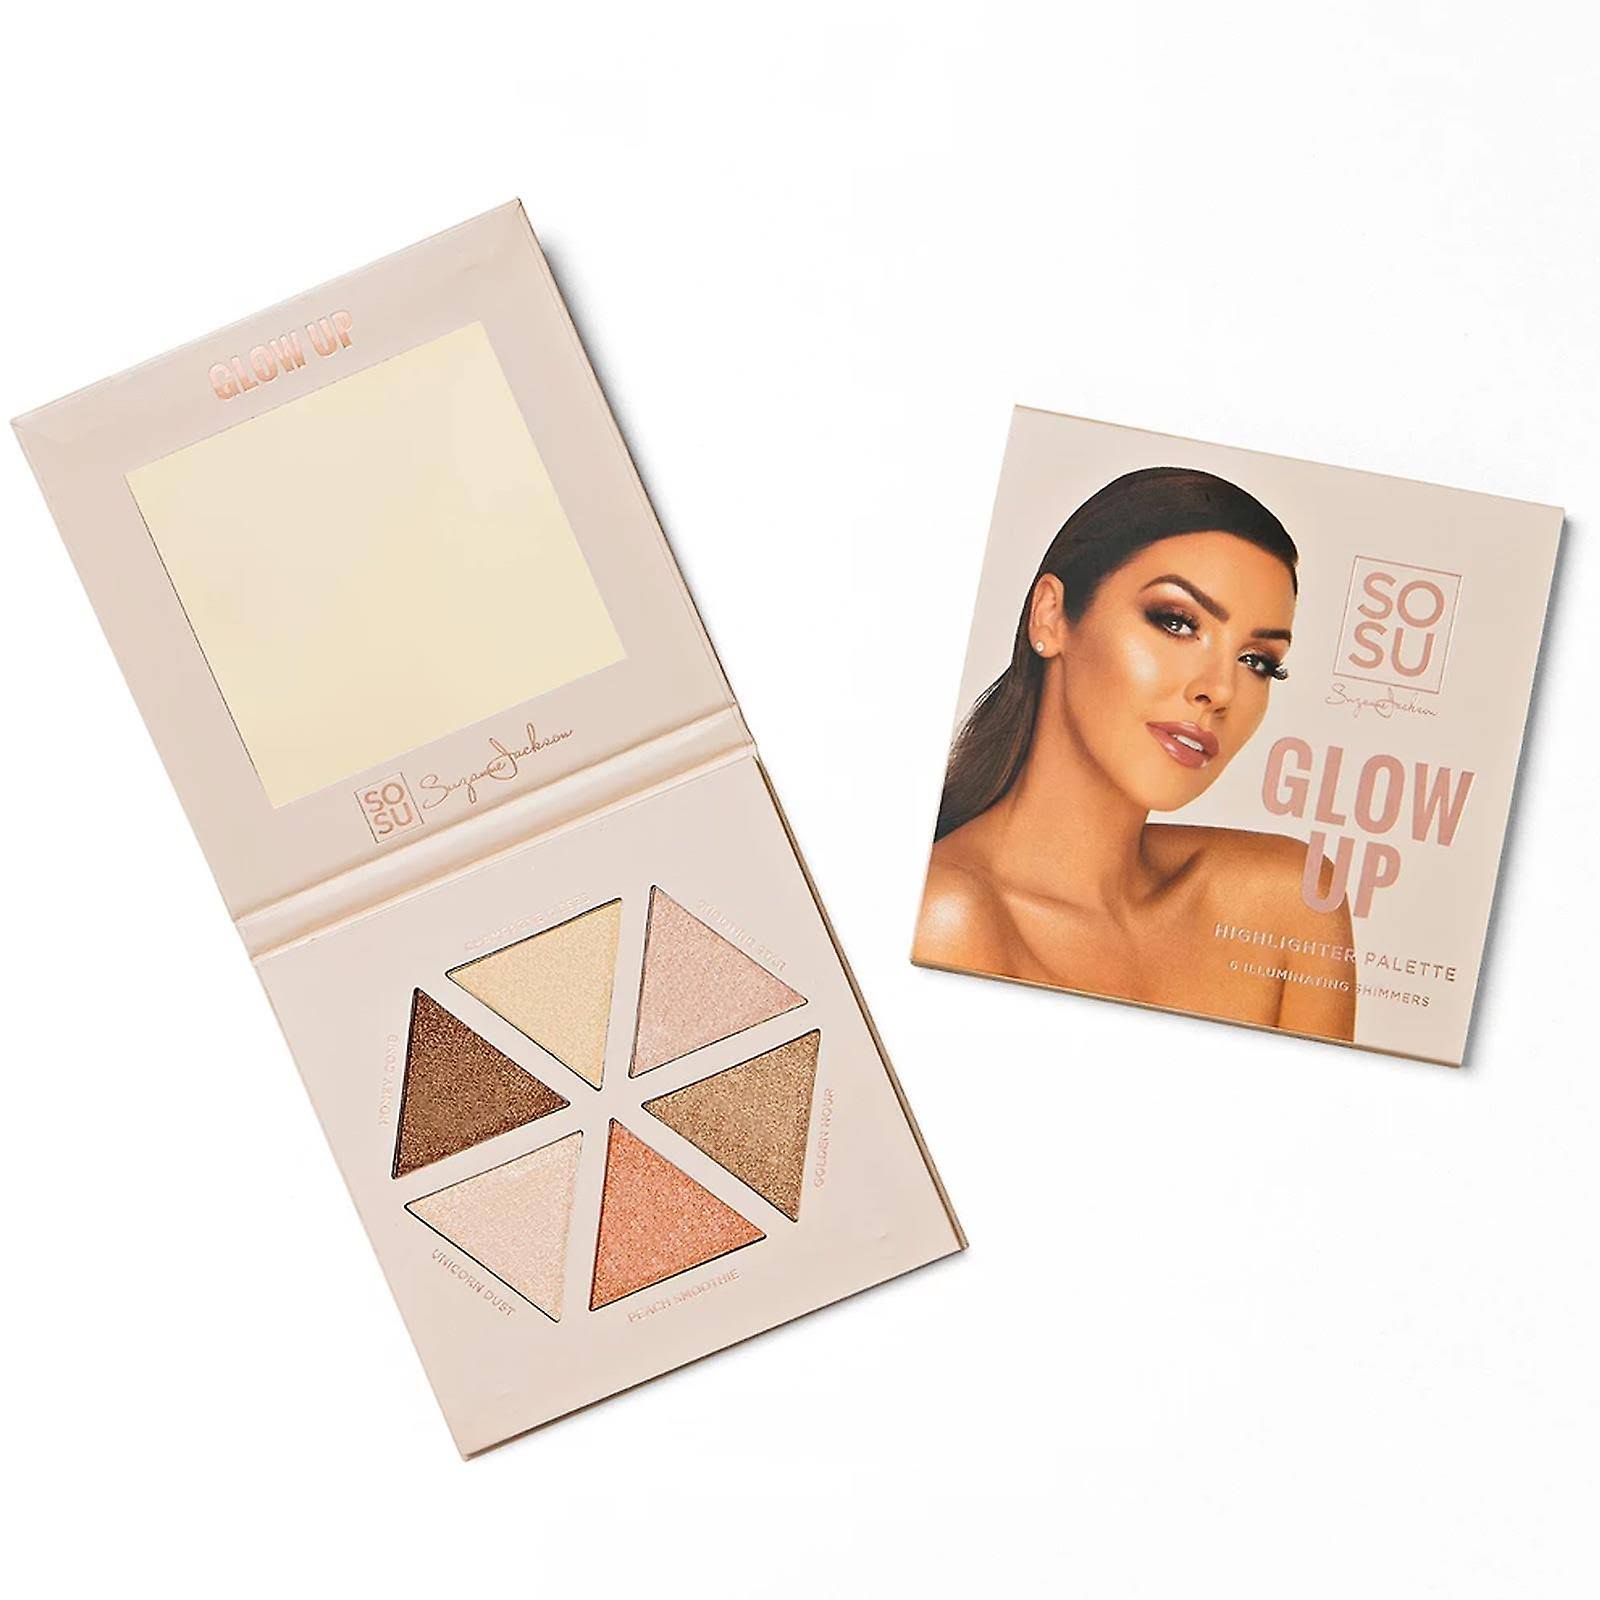 SOSU by Suzanne Glow Up Highlighter Palette